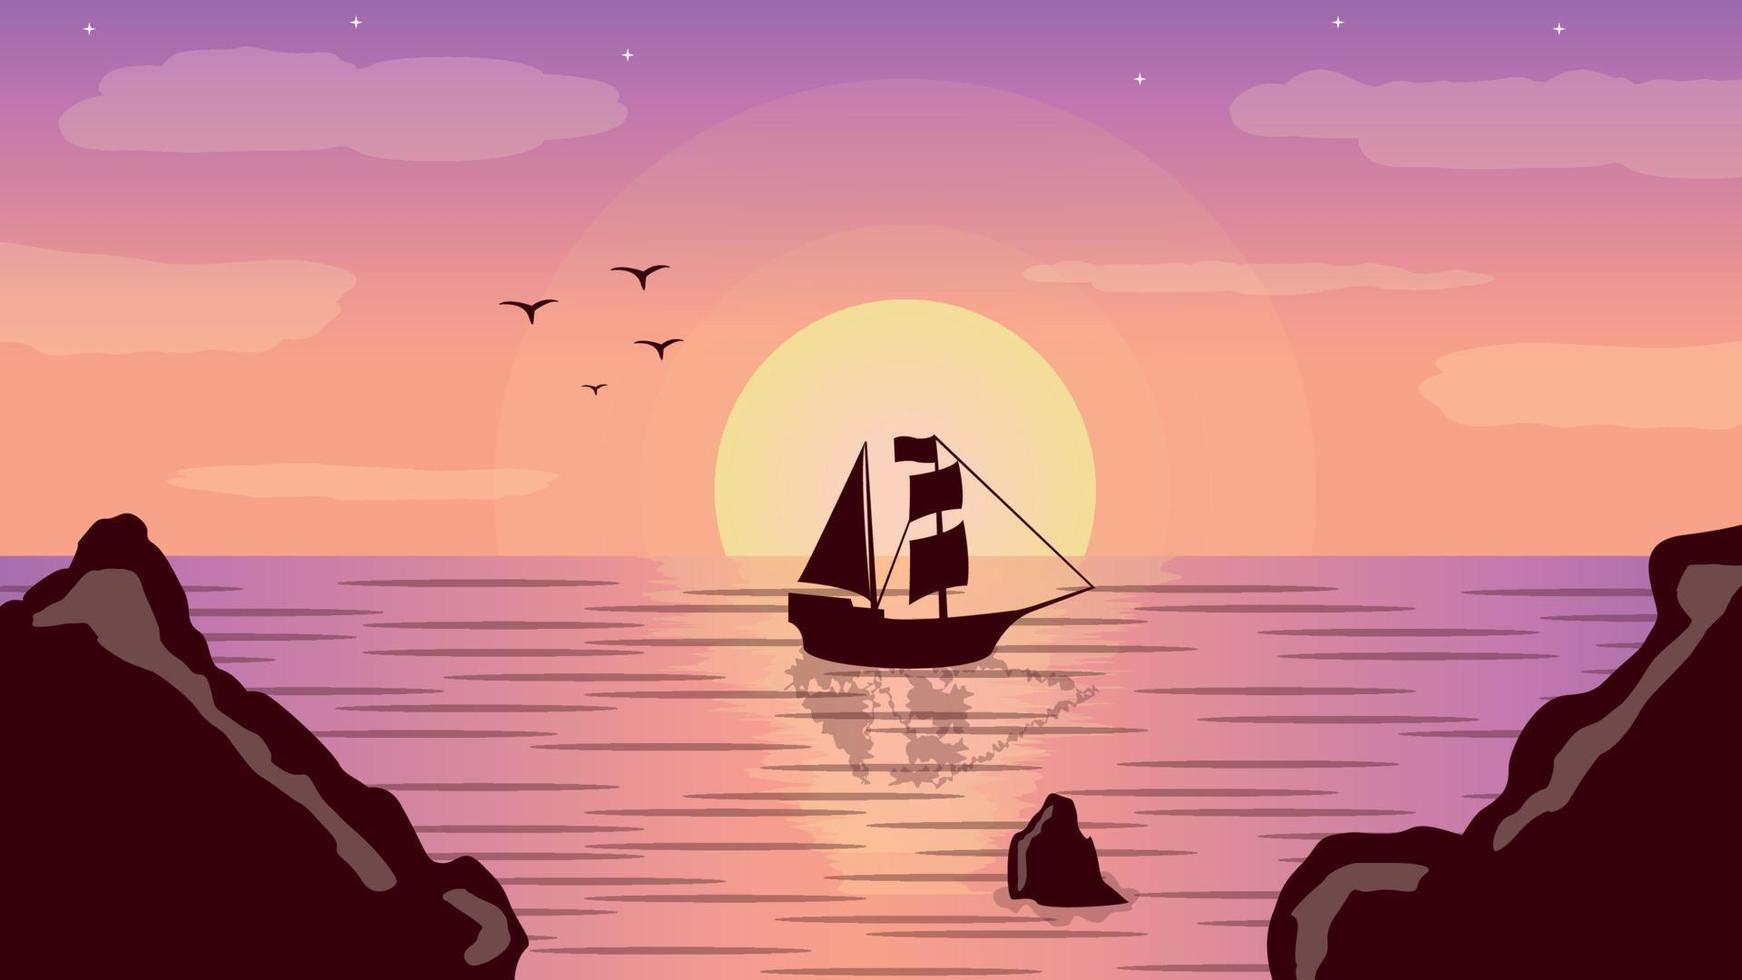 landscape illustration design of a boat on the ocean with a beautiful sunset vector